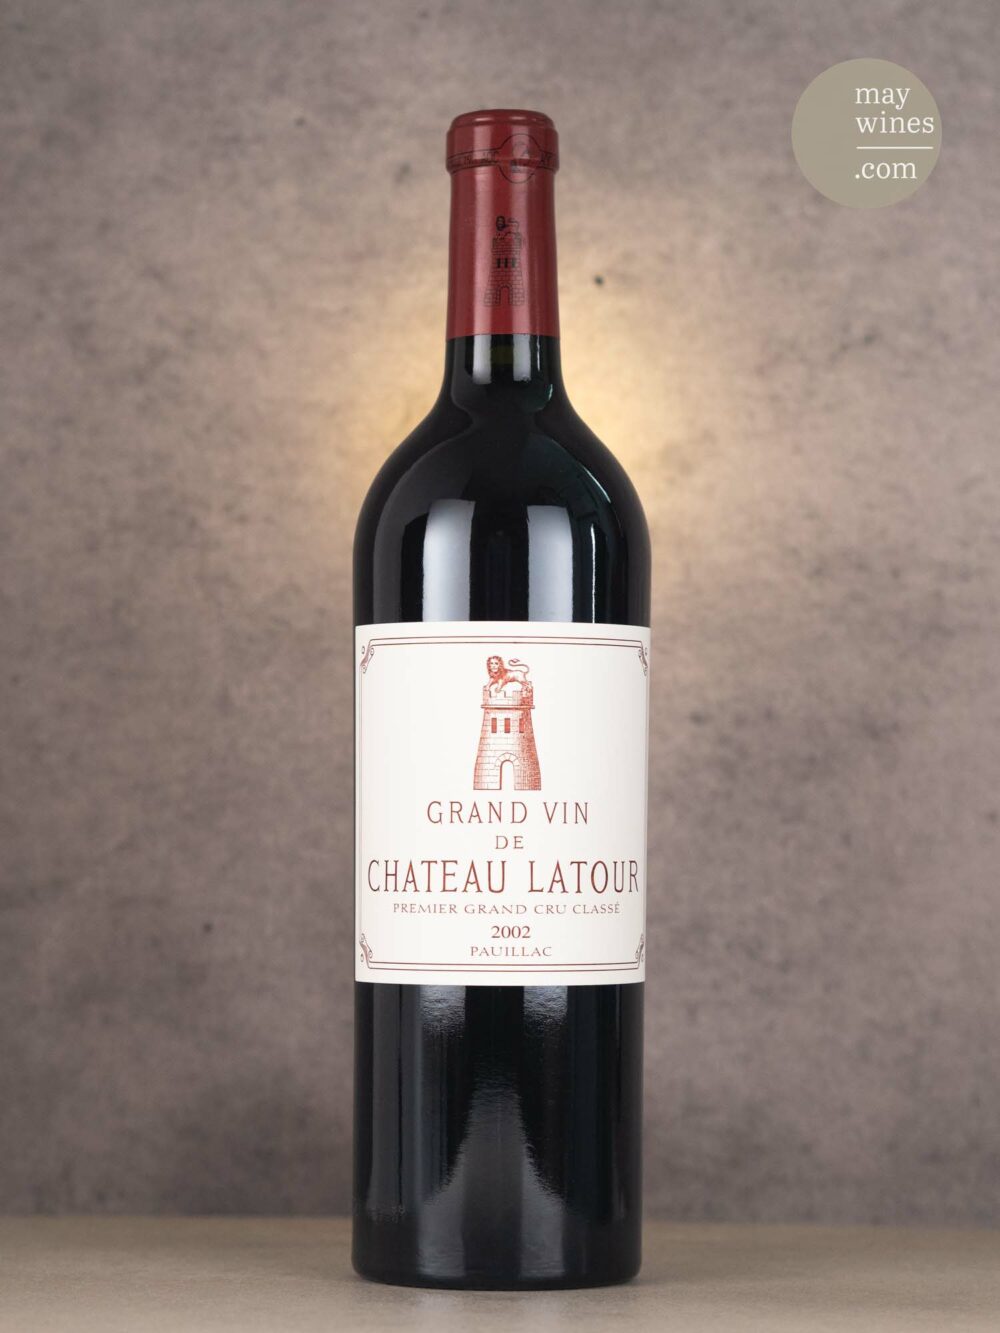 May Wines – Rotwein – 2002 Château Latour